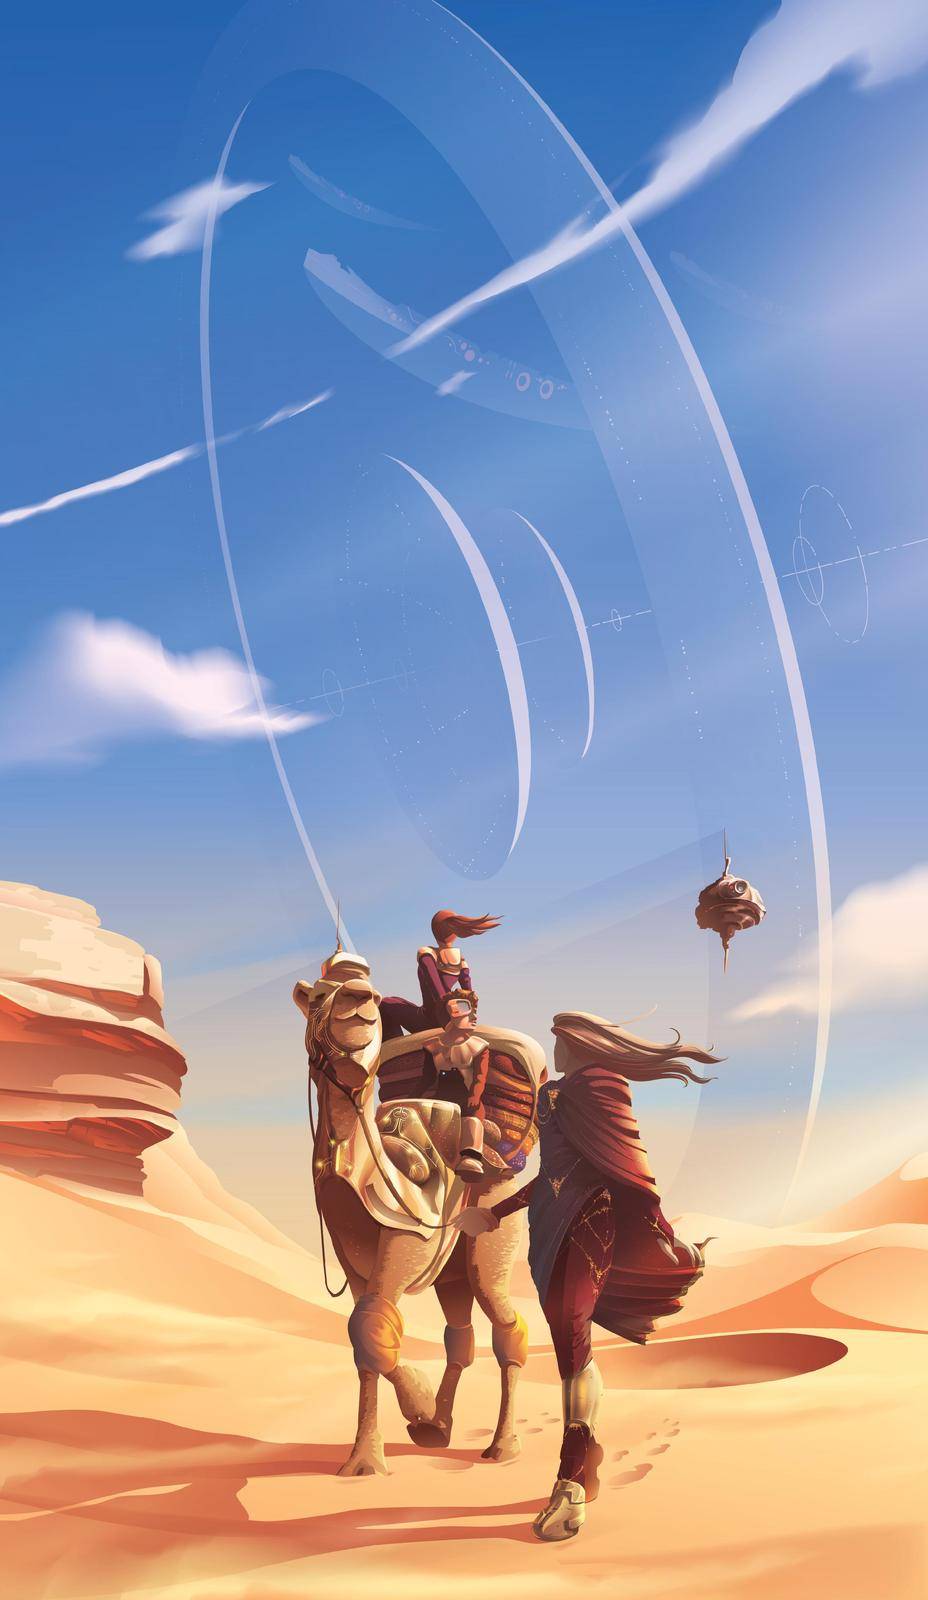 a family is traveling in a desert for their pilgrimage with a view on the background of a futuristic massive structure in the orbit. by bryanvectorartist